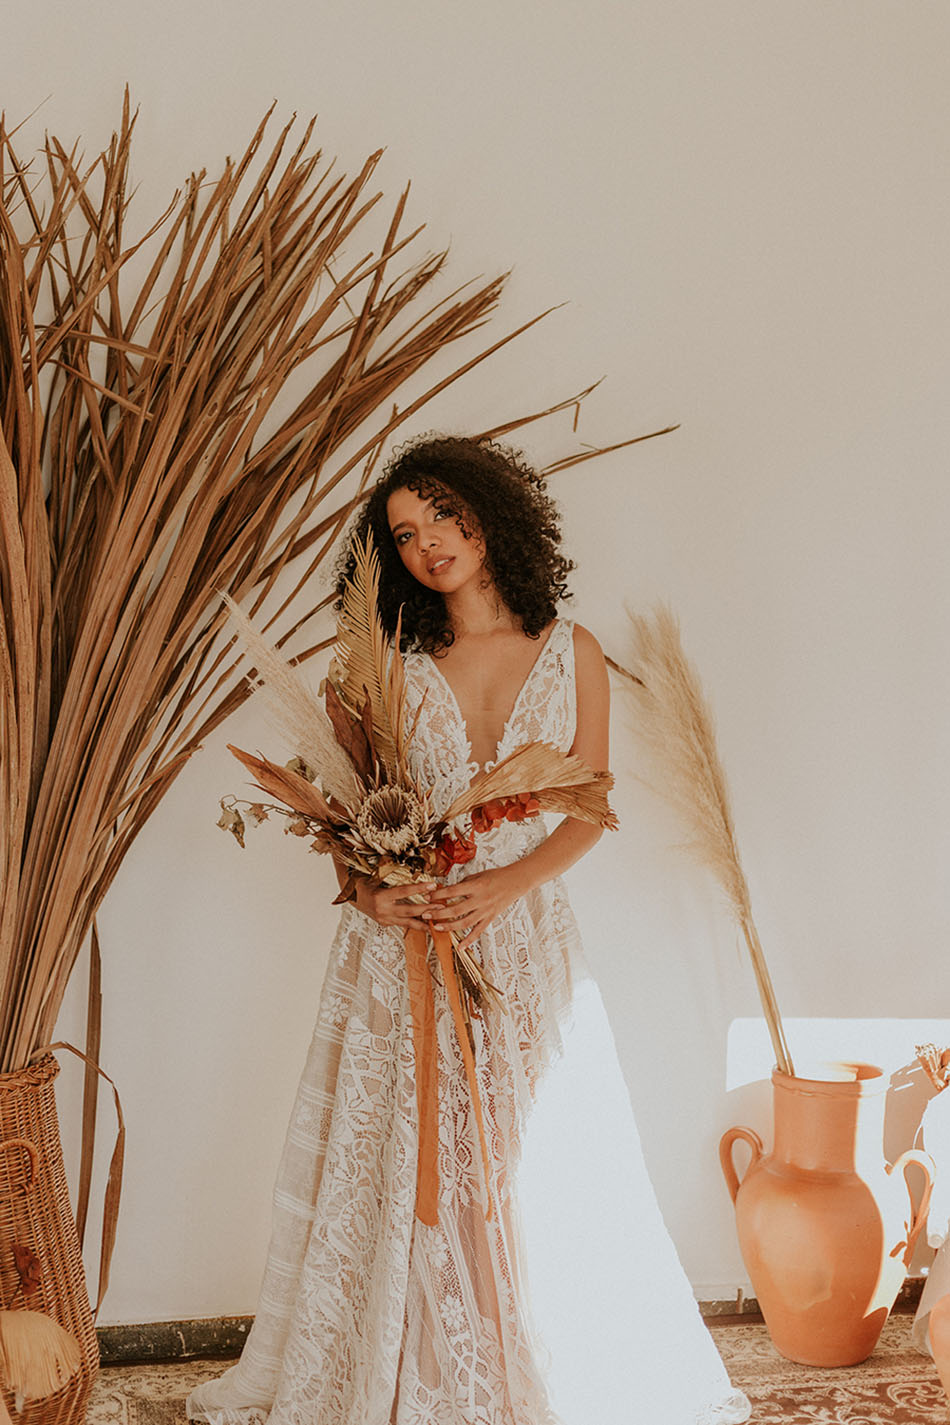 How To Make Your Wedding More Sustainable